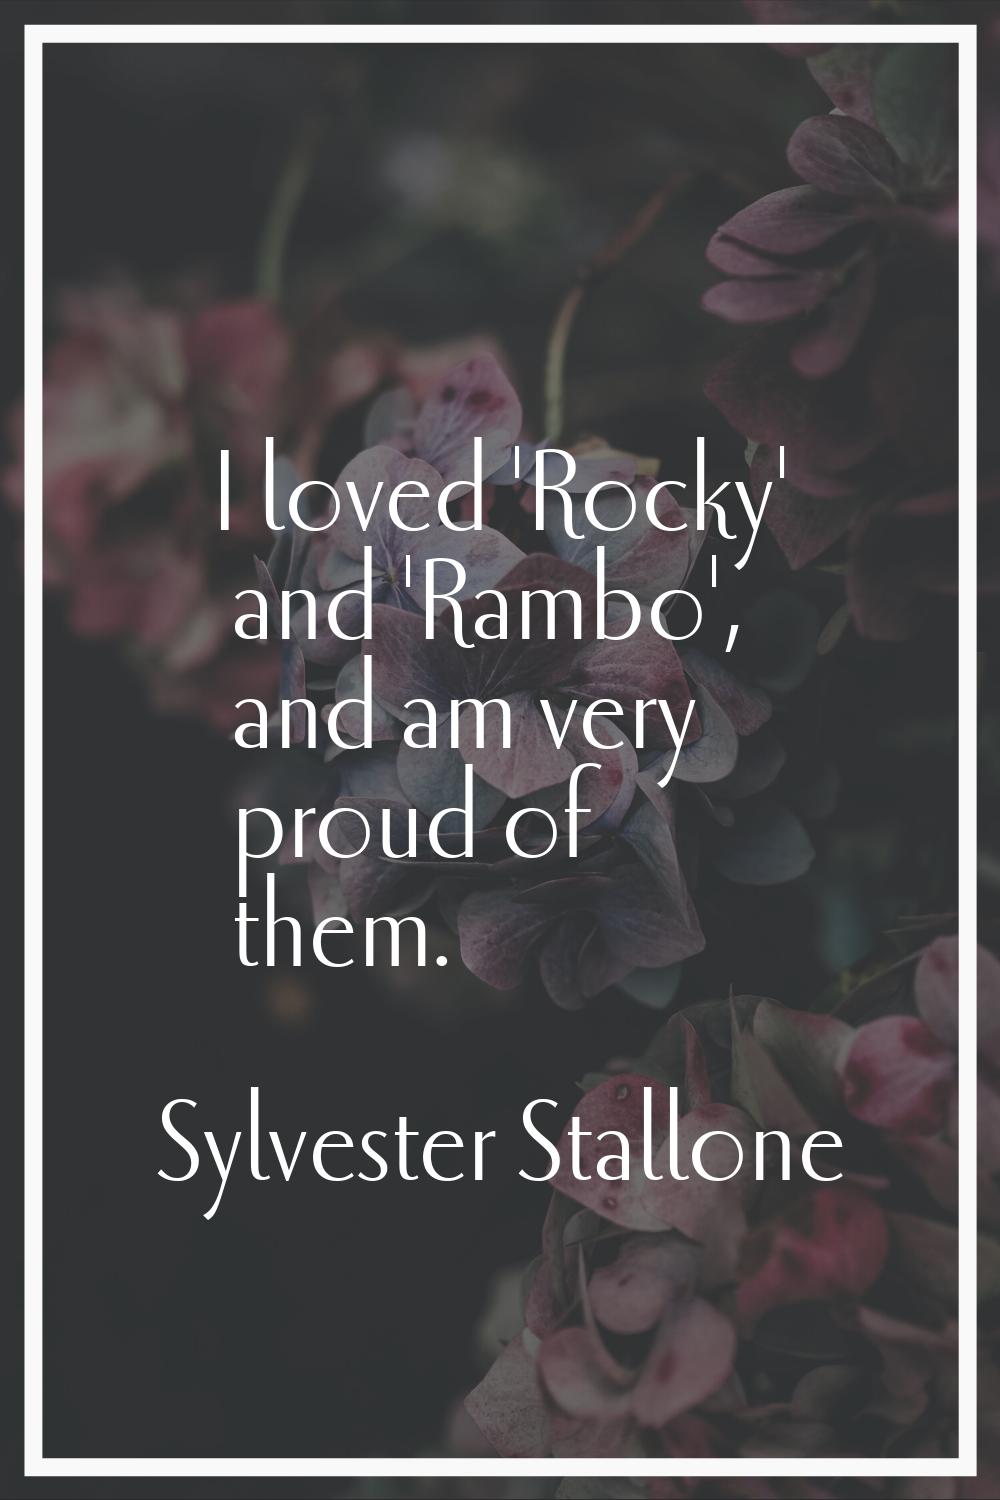 I loved 'Rocky' and 'Rambo', and am very proud of them.